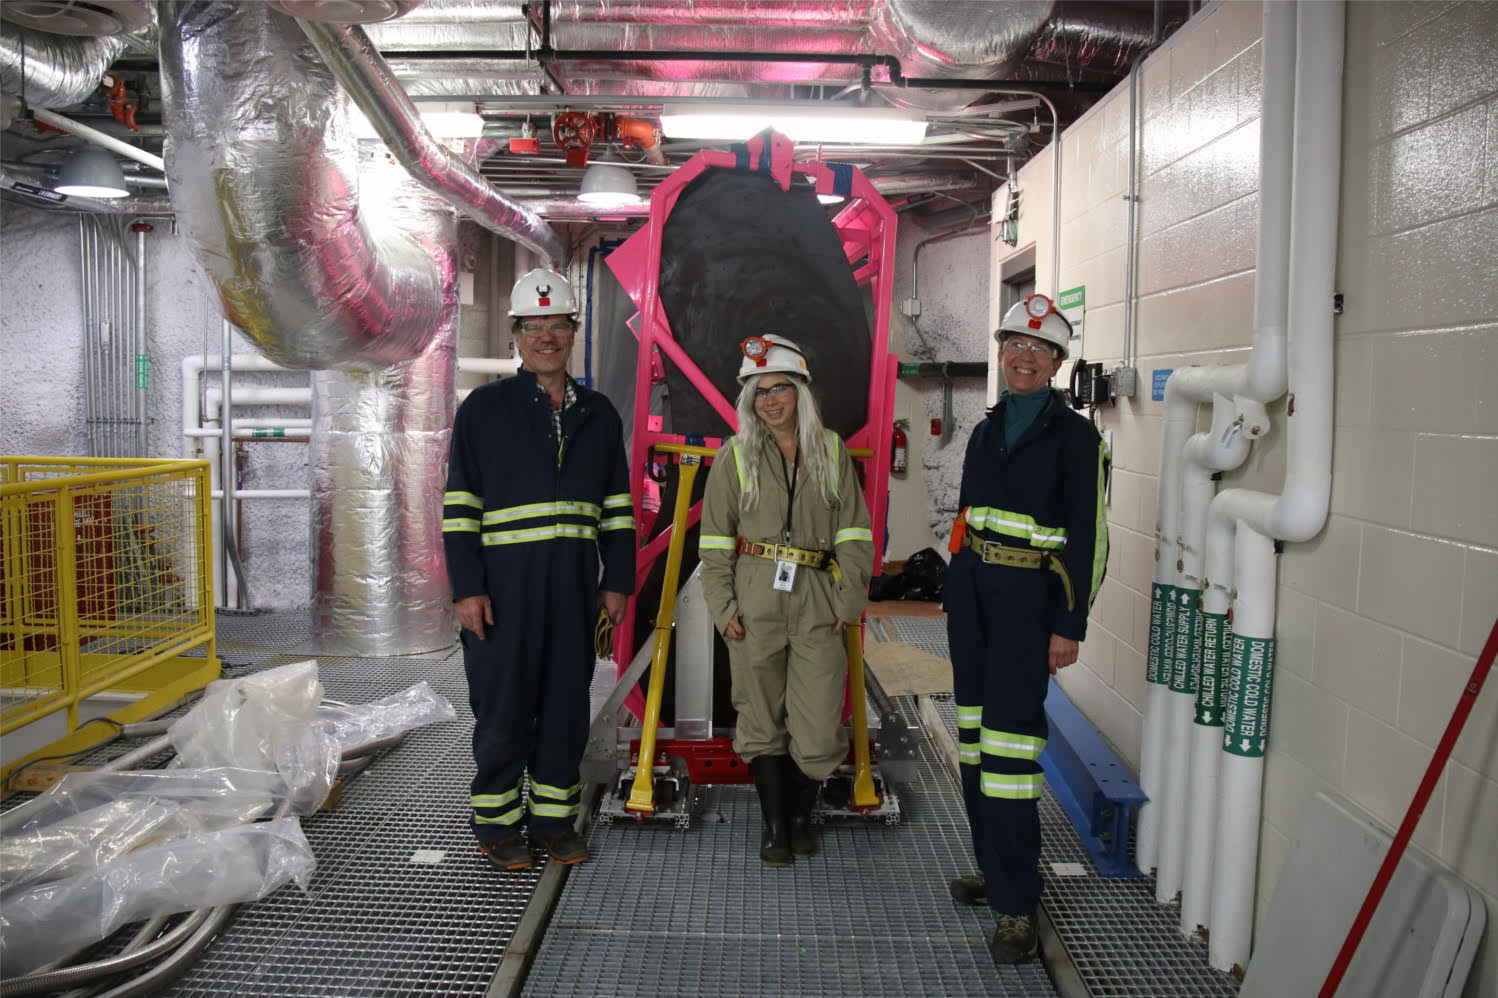 Photo - From left to right: LZ Chief Engineer Jeff Cherwinka, UC Santa Barbara postdoctoral researcher Sally Shaw, and UC Santa Barbara engineer Suzanne Kyre in teh Sanford Underground Research Facility's Davis Laboratory on Oct. 11. Behind them is a support frame, custom cart, and steel tank mockup that was tested for the delivery of acrylic tanks. (Credit: Constance Walter/Sanford Underground Research Facility)